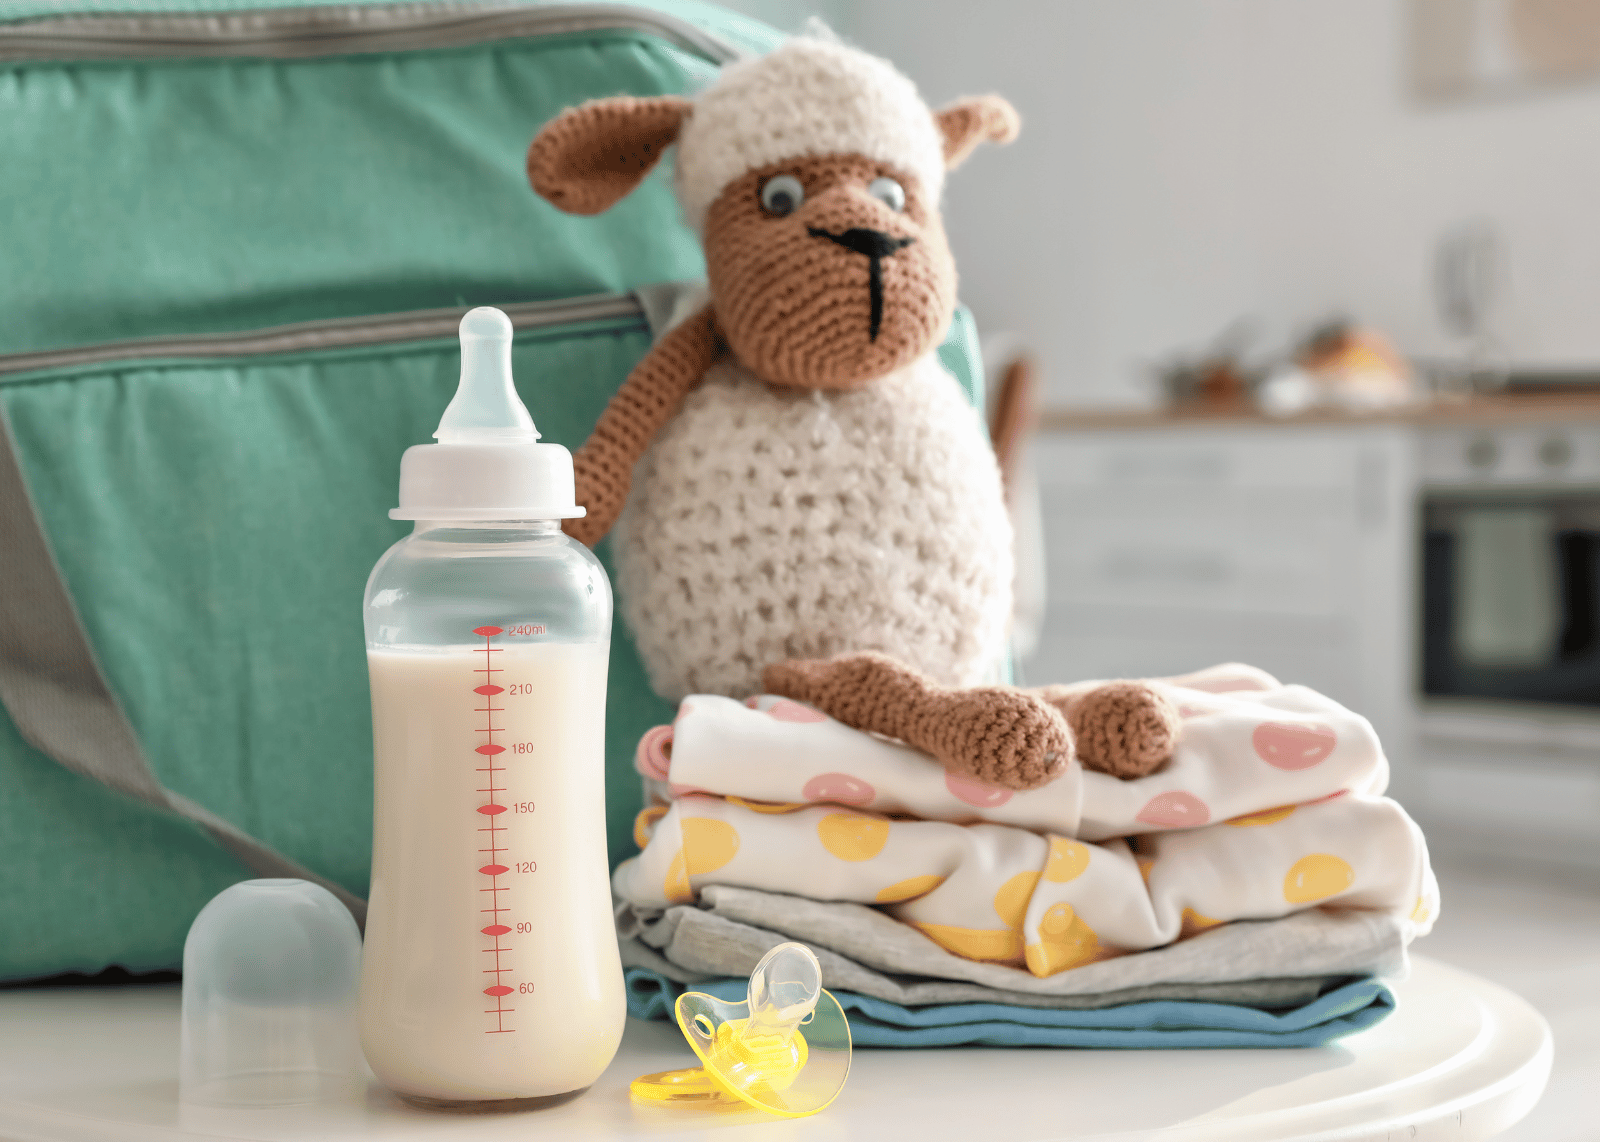 Controversy beneath infant products